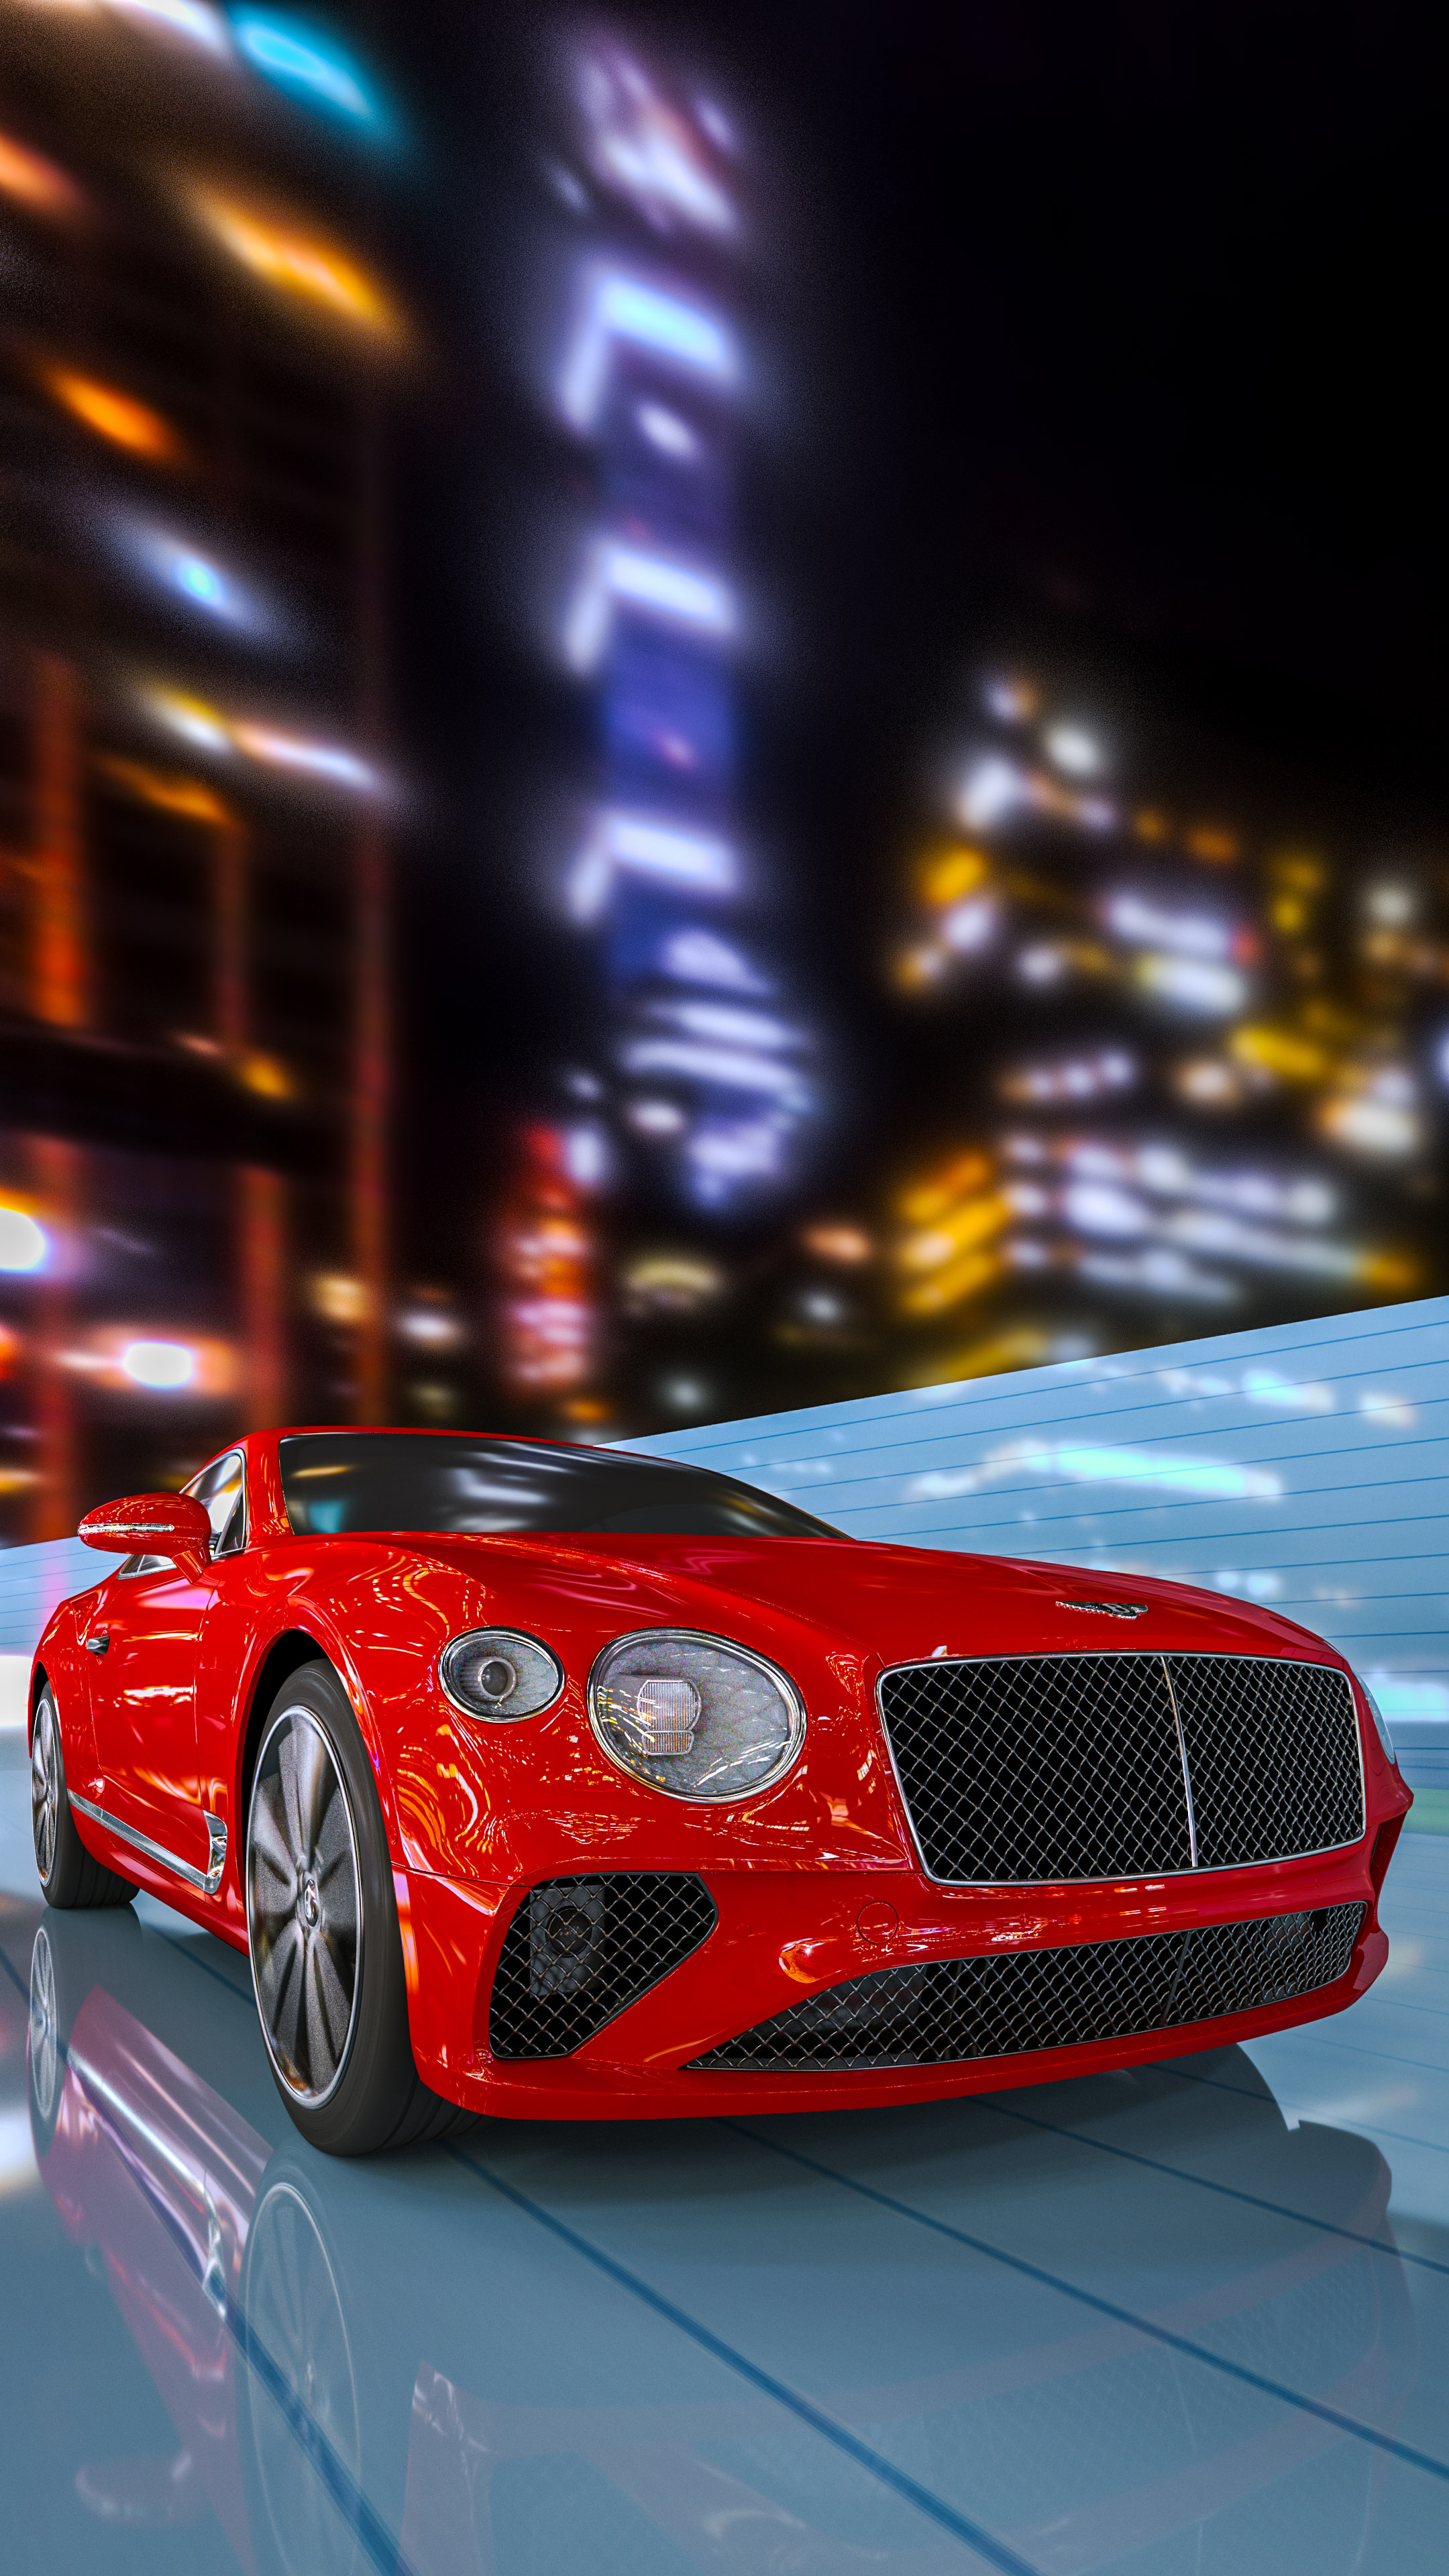 Savor the sophistication of the red Bentley Continental GT with our car wallpaper for iPhone, showcasing the epitome of British elegance.